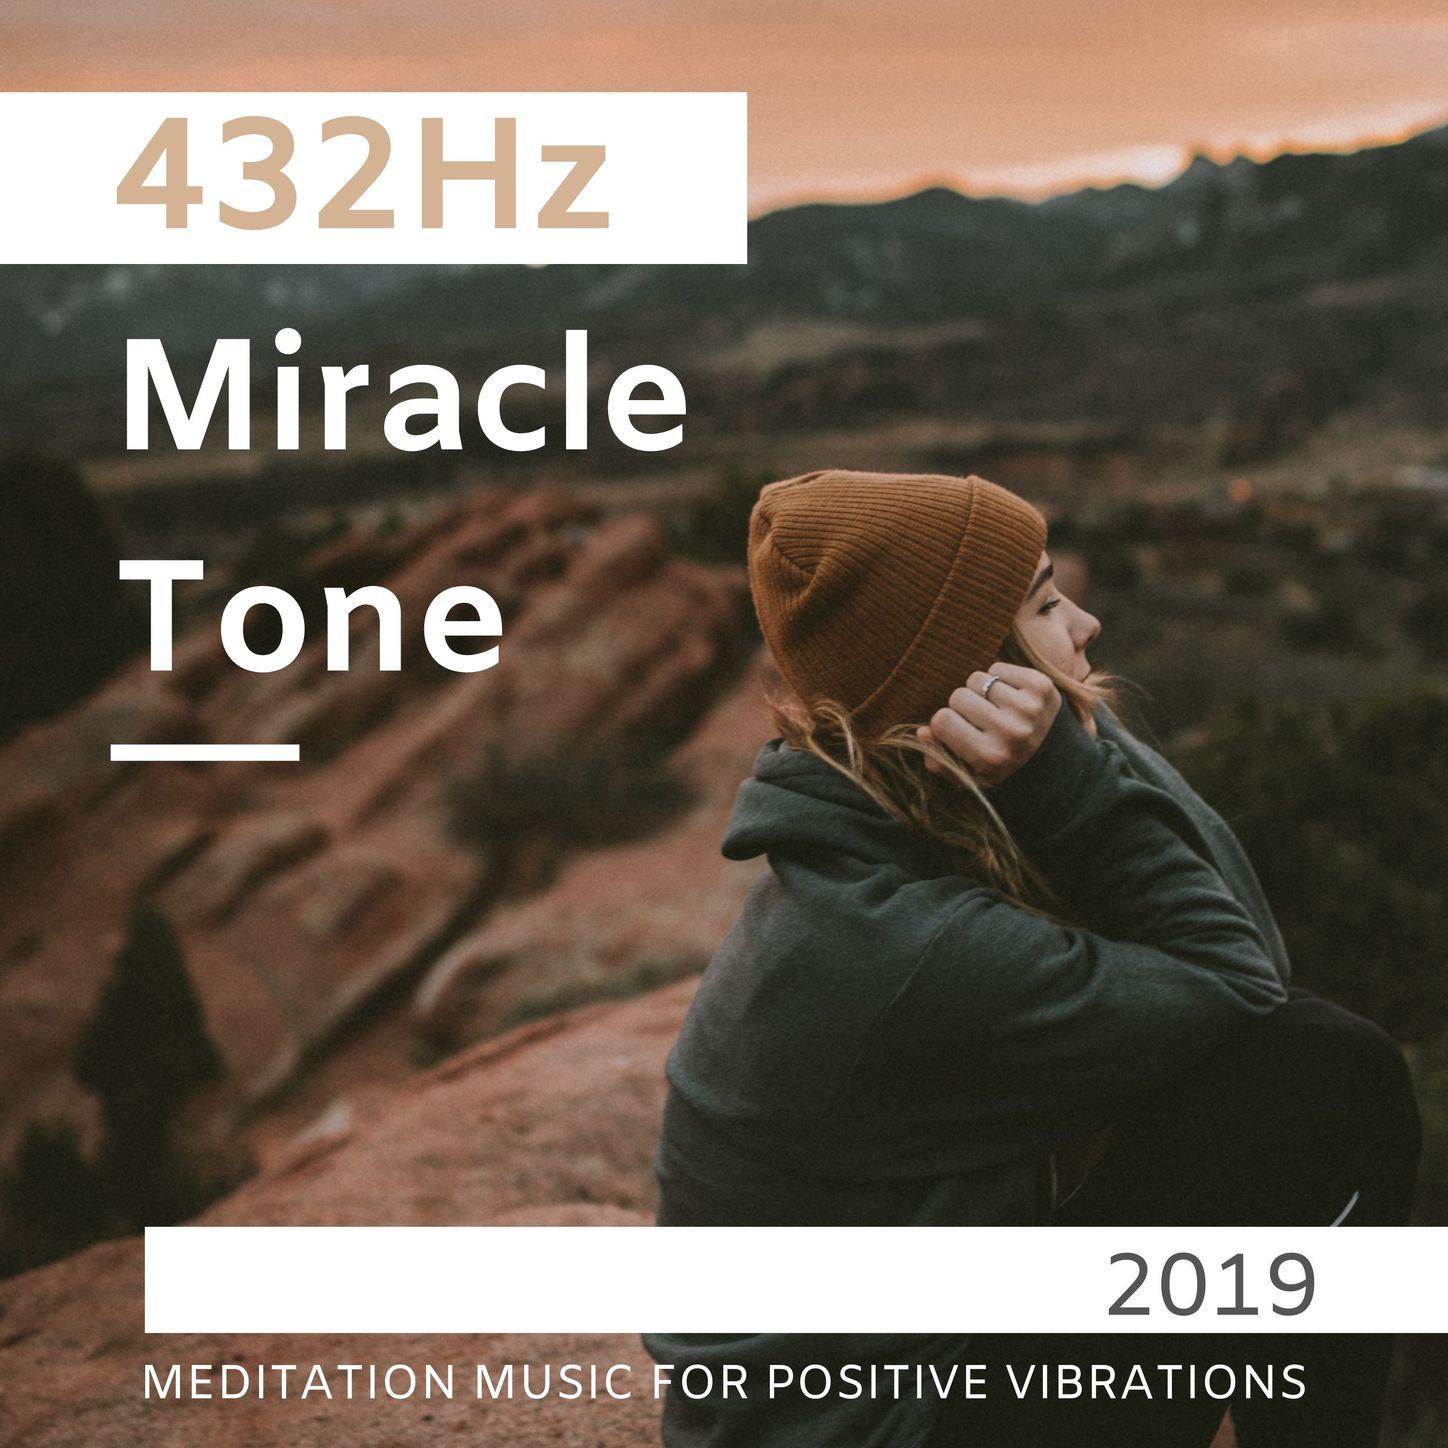 432Hz Miracle Tone 2019 - Meditation Music for Positive Vibrations